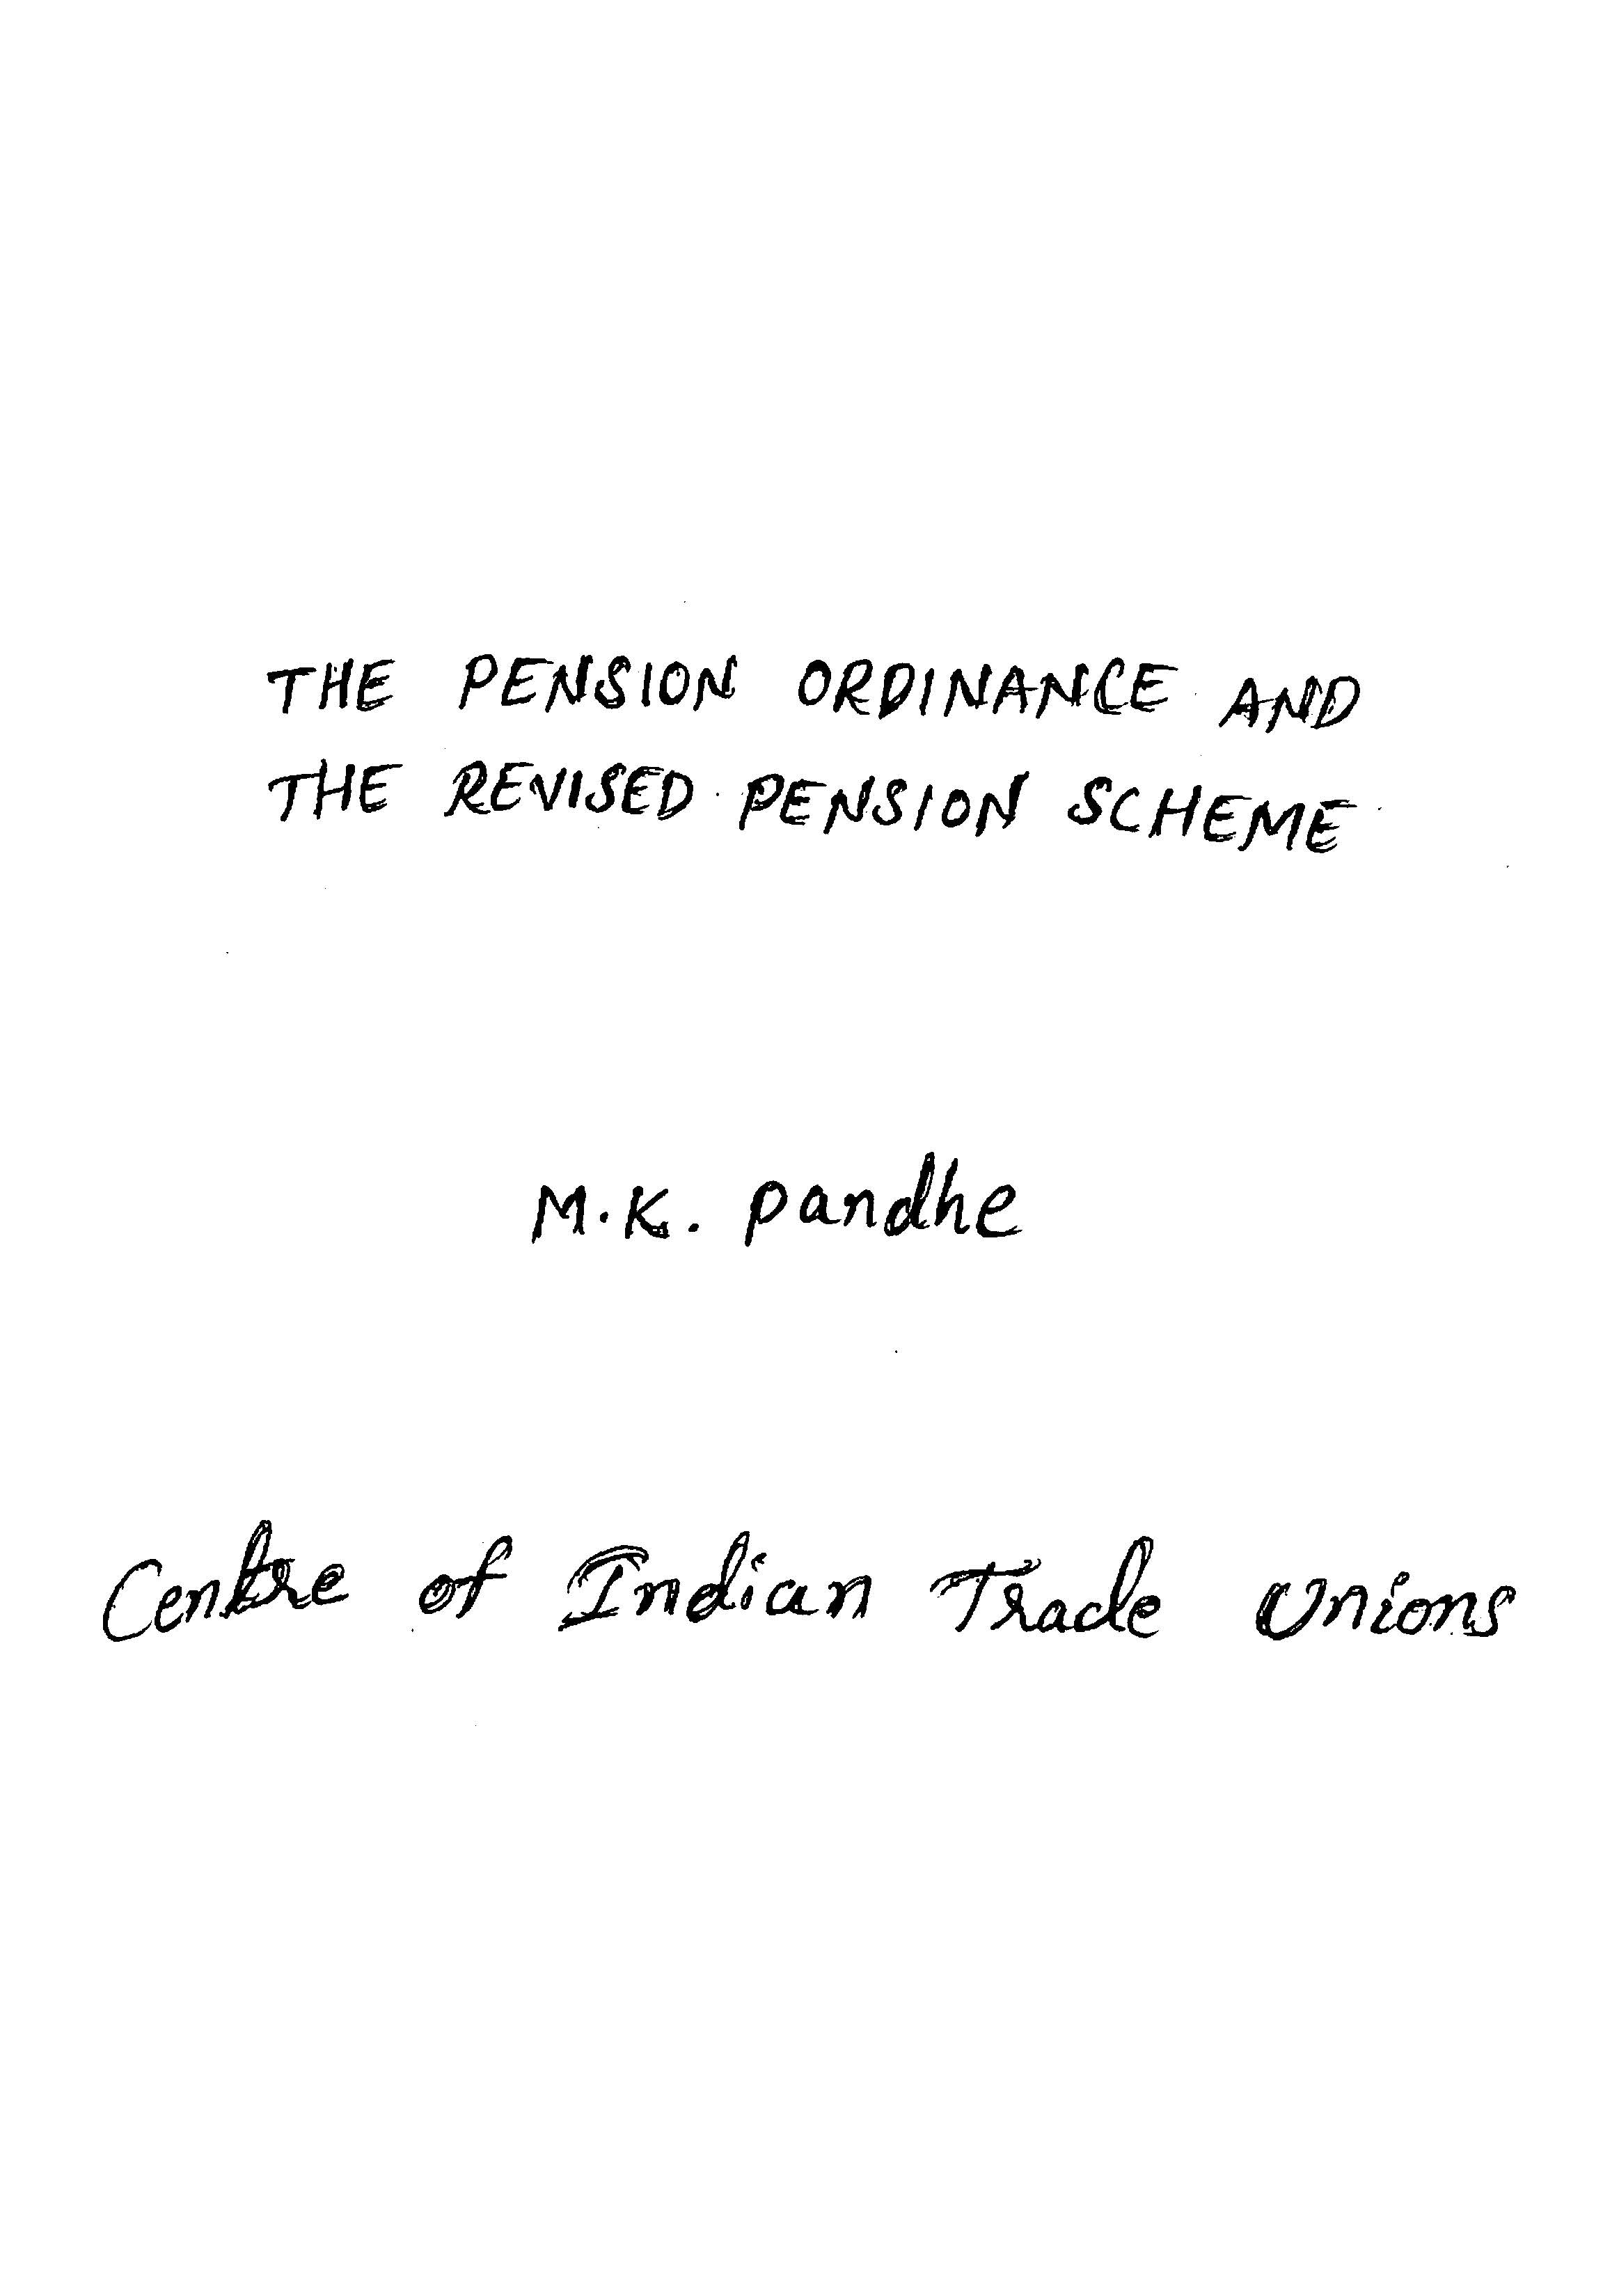 The Pension Ordinance And The Revised Pension Scheme